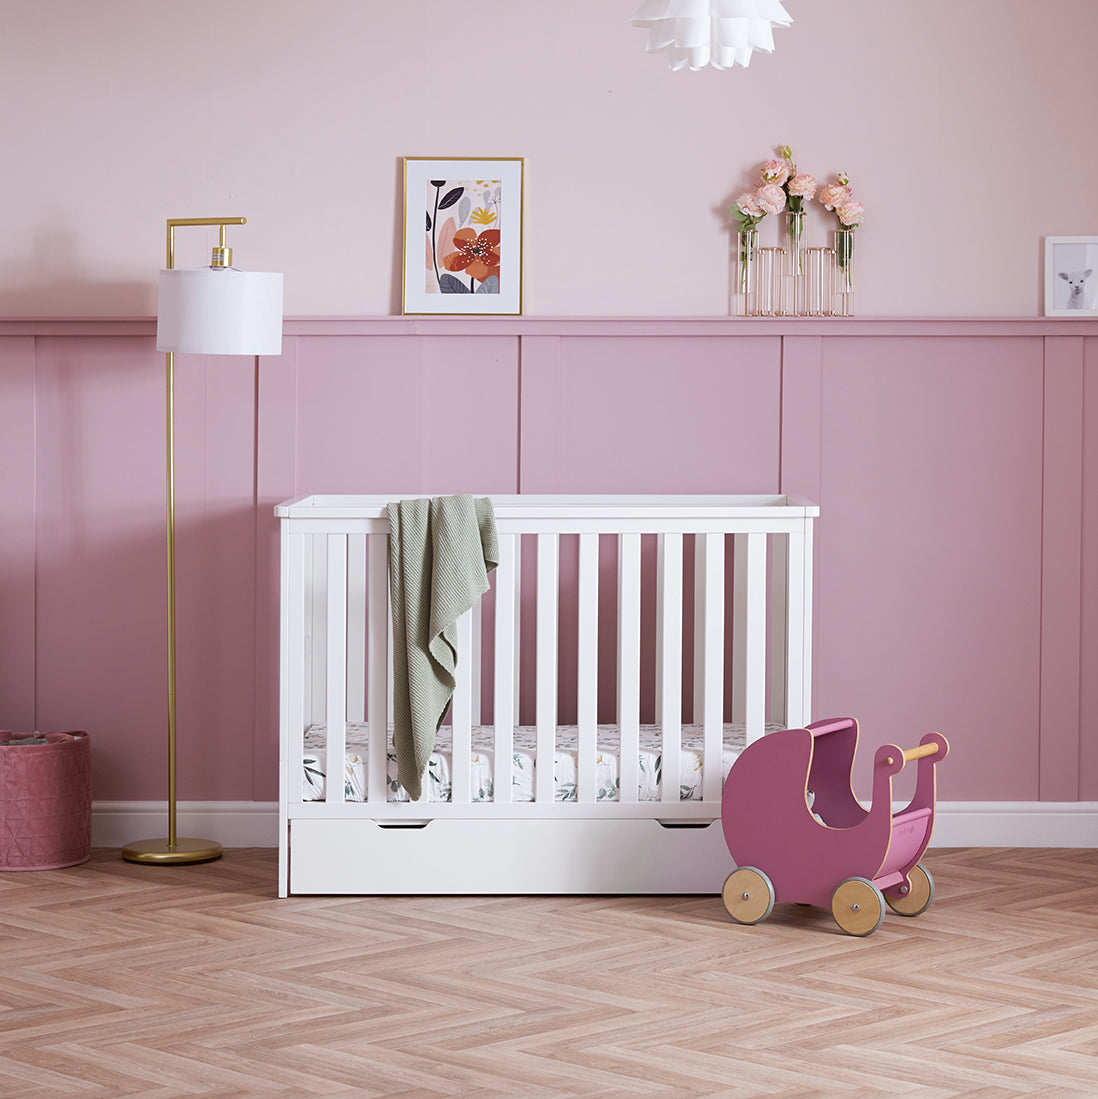 Obaby Evie Under Drawer for Evie Mini Cot Bed in a White or Cachemere finish - Land of Little